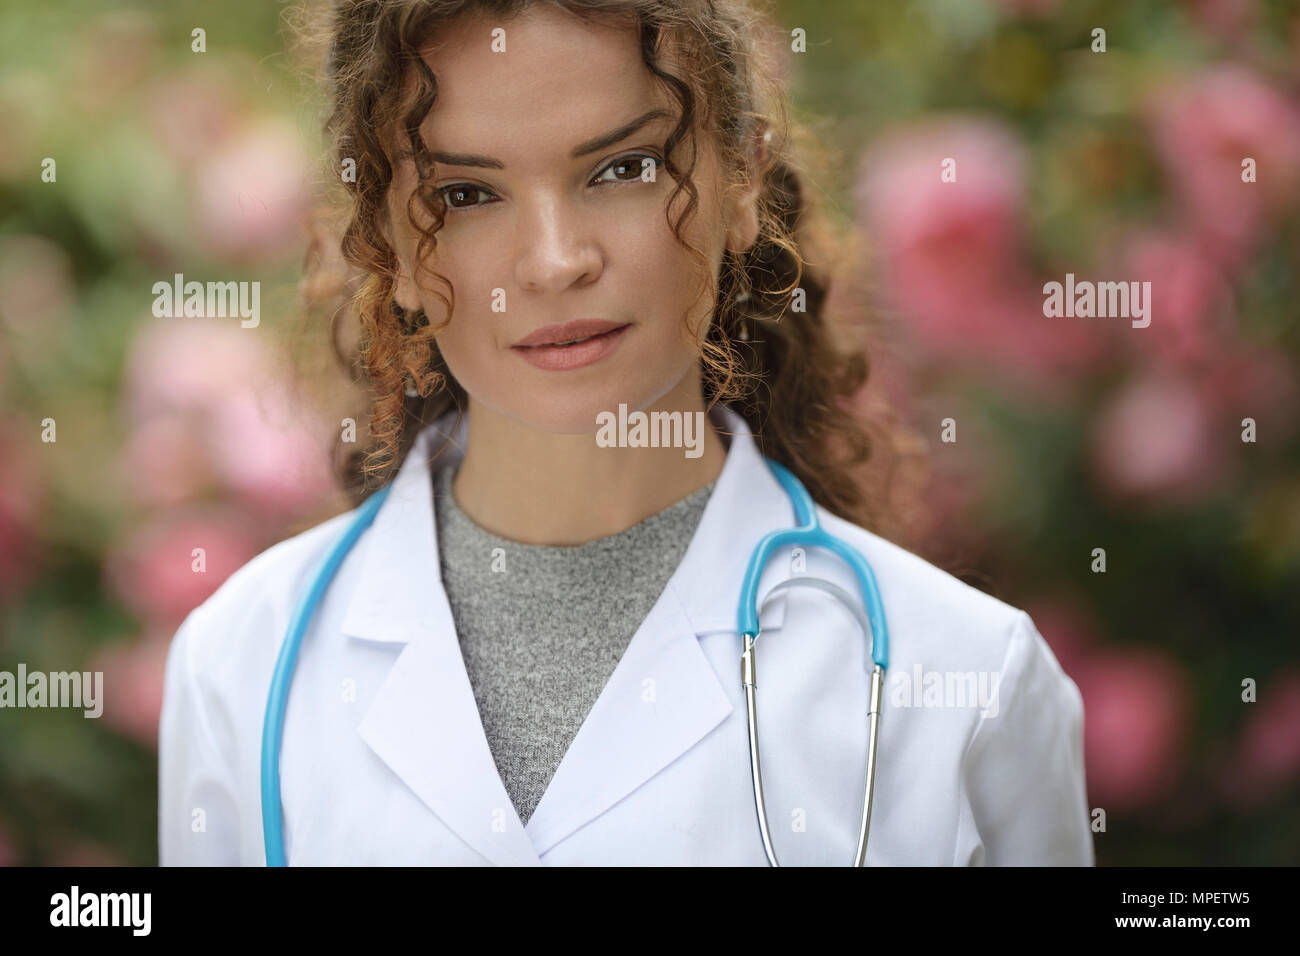 Portrait of a young woman, medical practitioner, healthcare professional, doctor, physician wearing a lab coat in natural outdoor settings with blosso Stock Photo